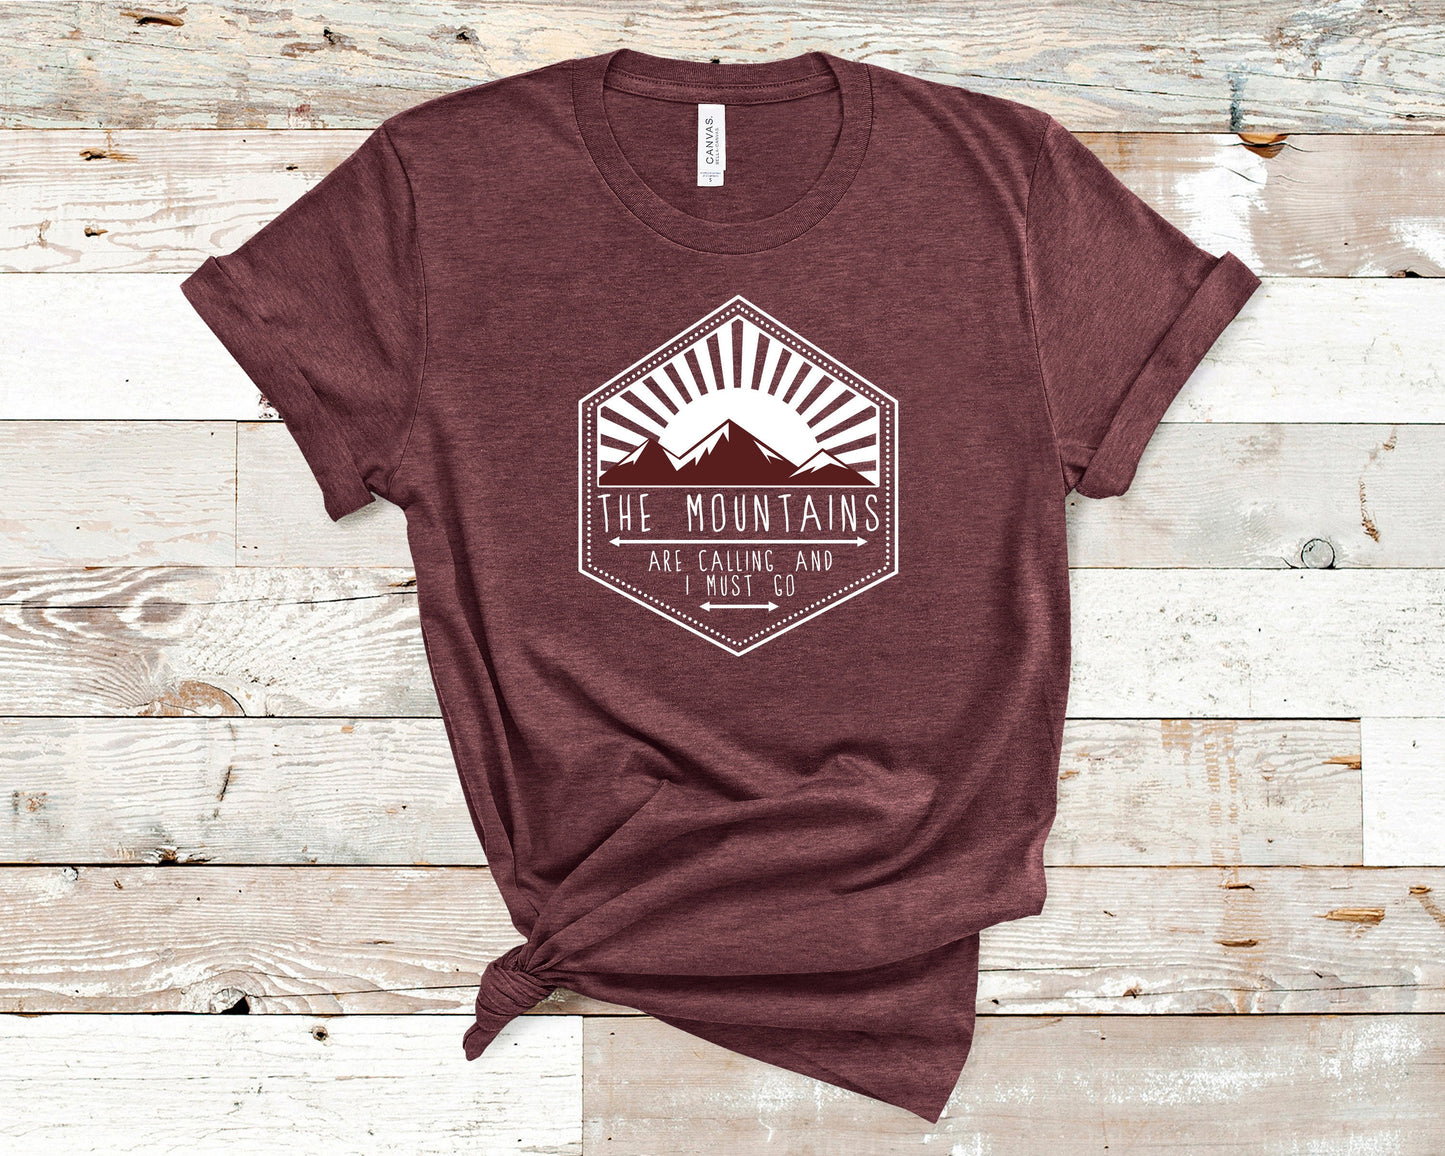 The Mountains Are Calling and I Must Go- Unisex Adults